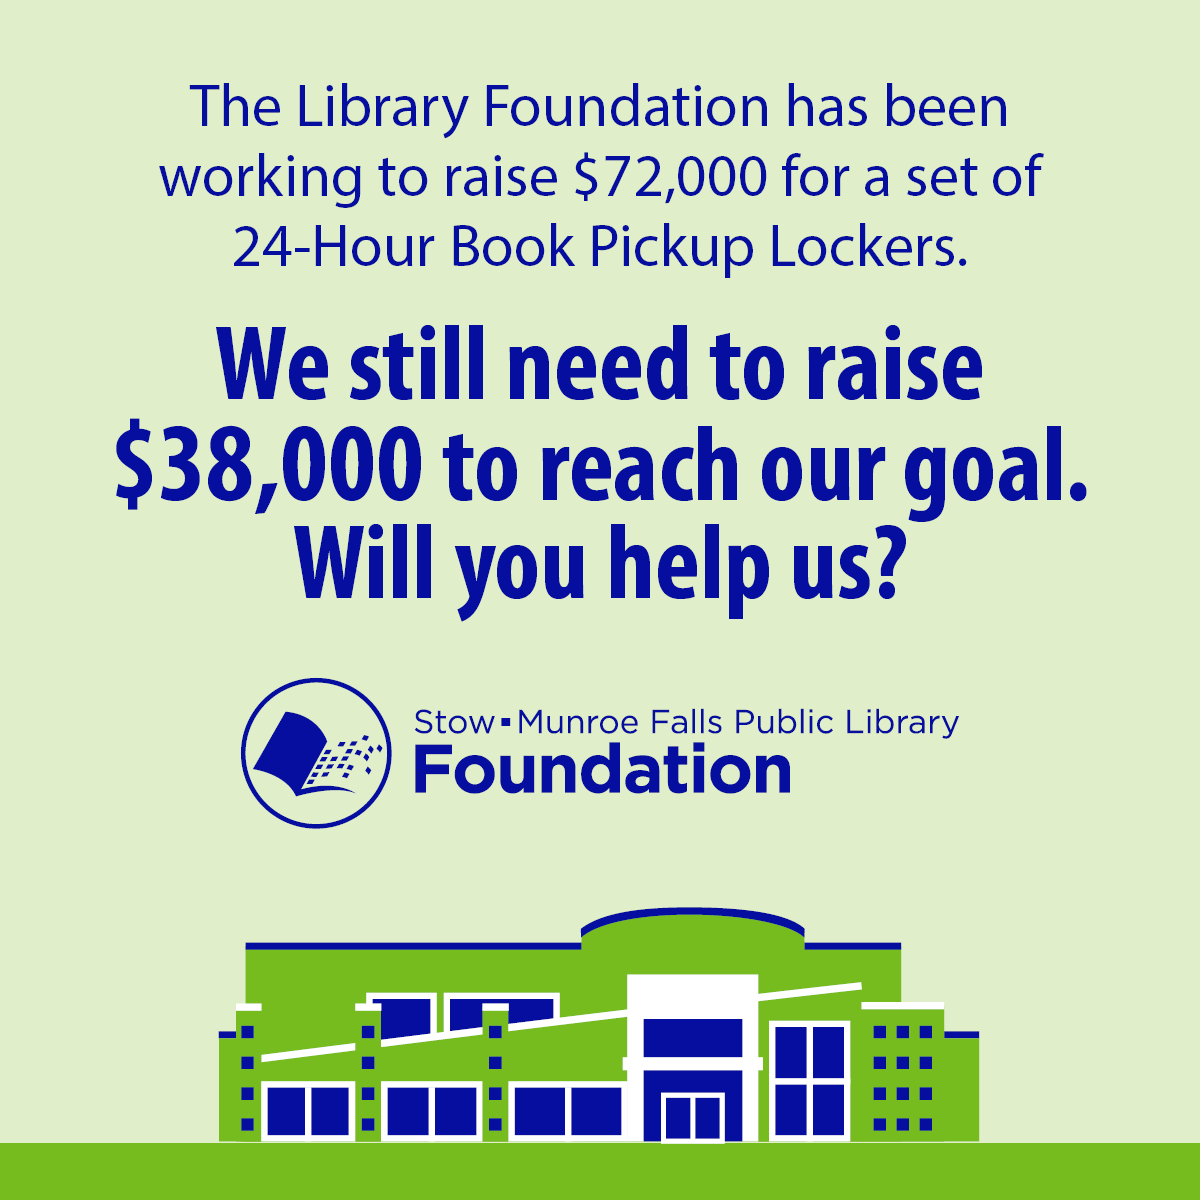 The Library Foundation has been working to raise $72,000 for a set of 24-Hour Book Pickup Lockers. We still need to raise $38,000 to reach our goal. Will you help us?